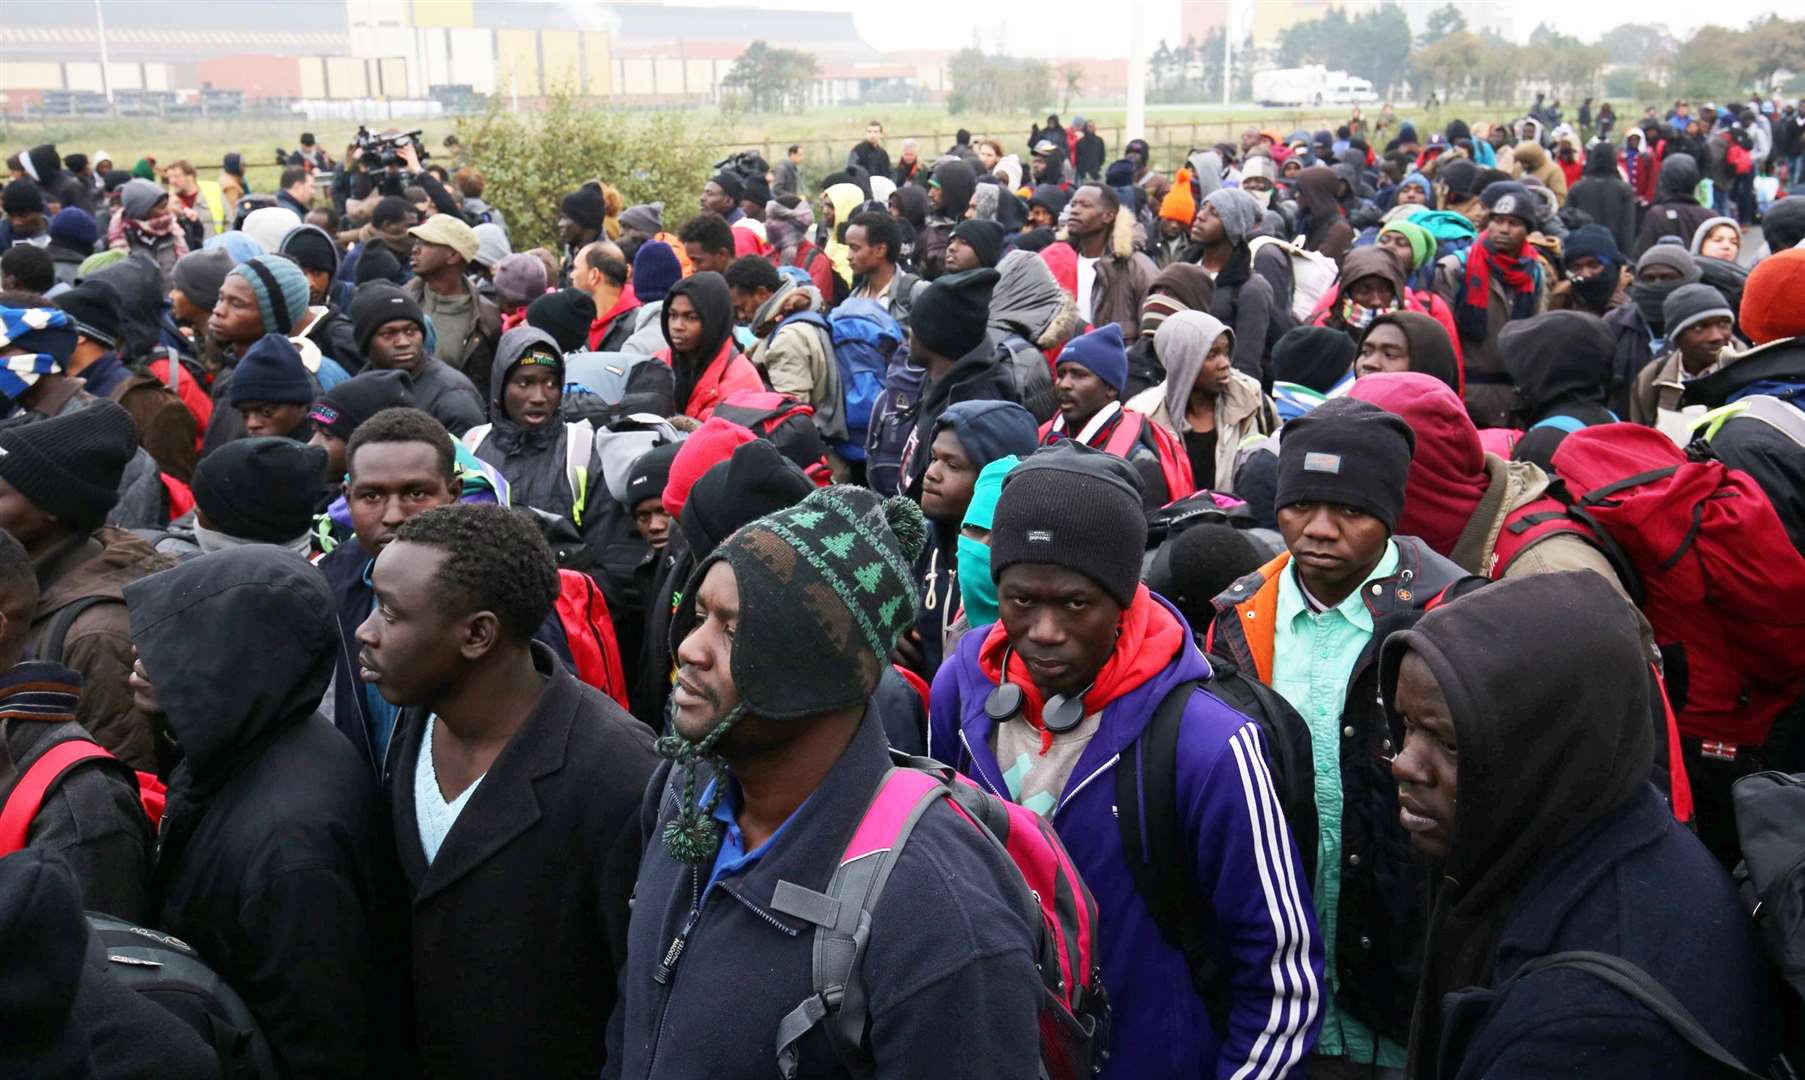 Migrants in Calais at the time of the closure of the Jungle, 2016. Picture copyright SWNS (South West News Service).